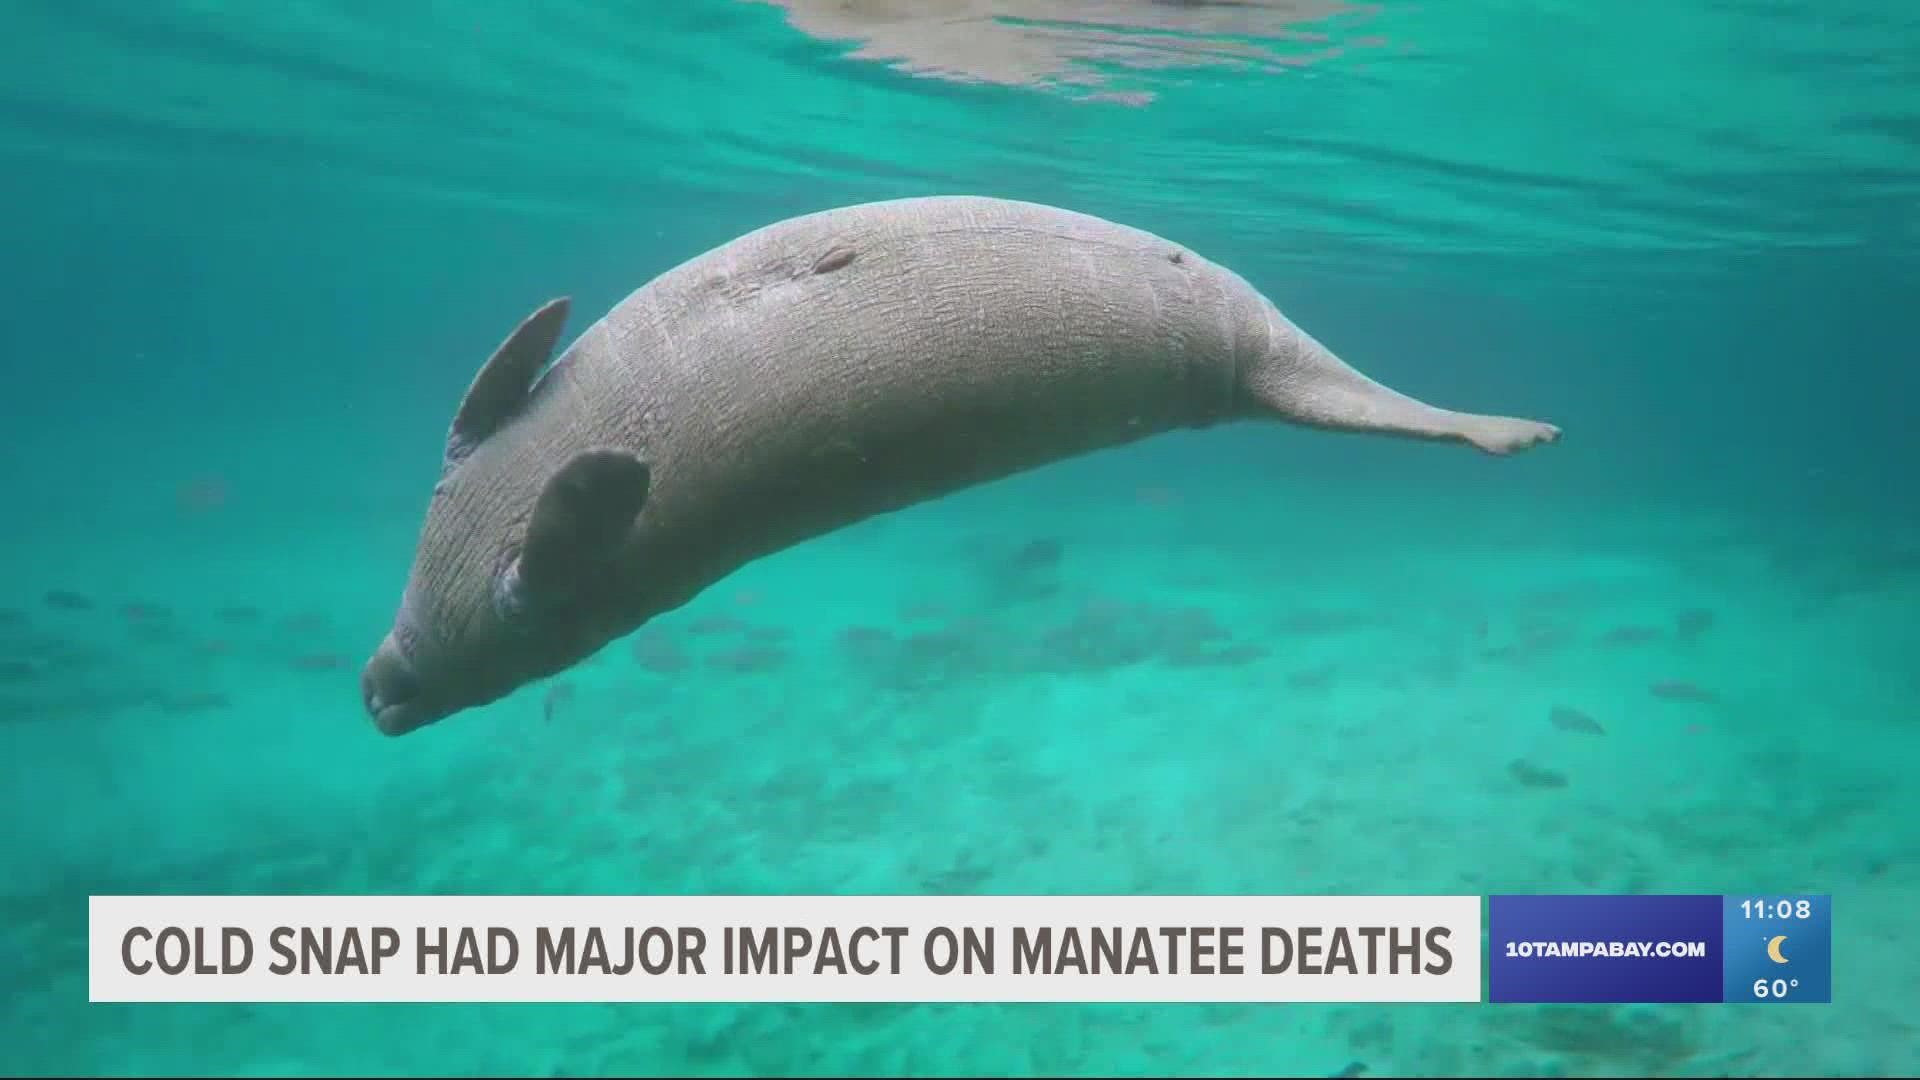 In 2022, officials say 783 manatee deaths have been confirmed through Dec. 23 from all causes, including boat strikes.